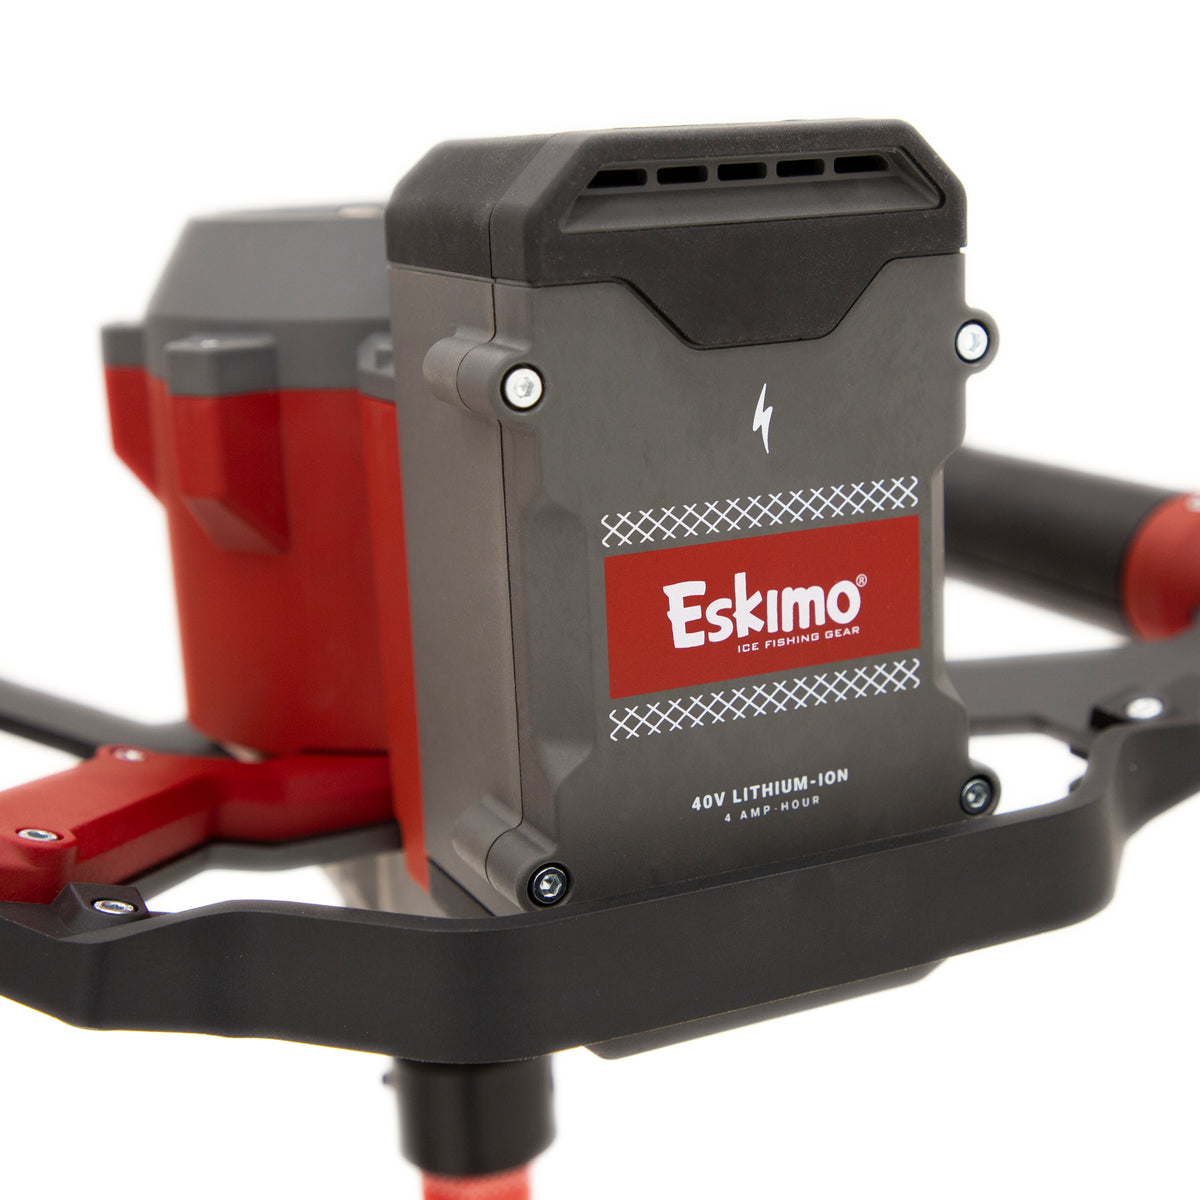 Eskimo E40 8" Steel Electric Auger 40v with FREE 2nd BATTERY